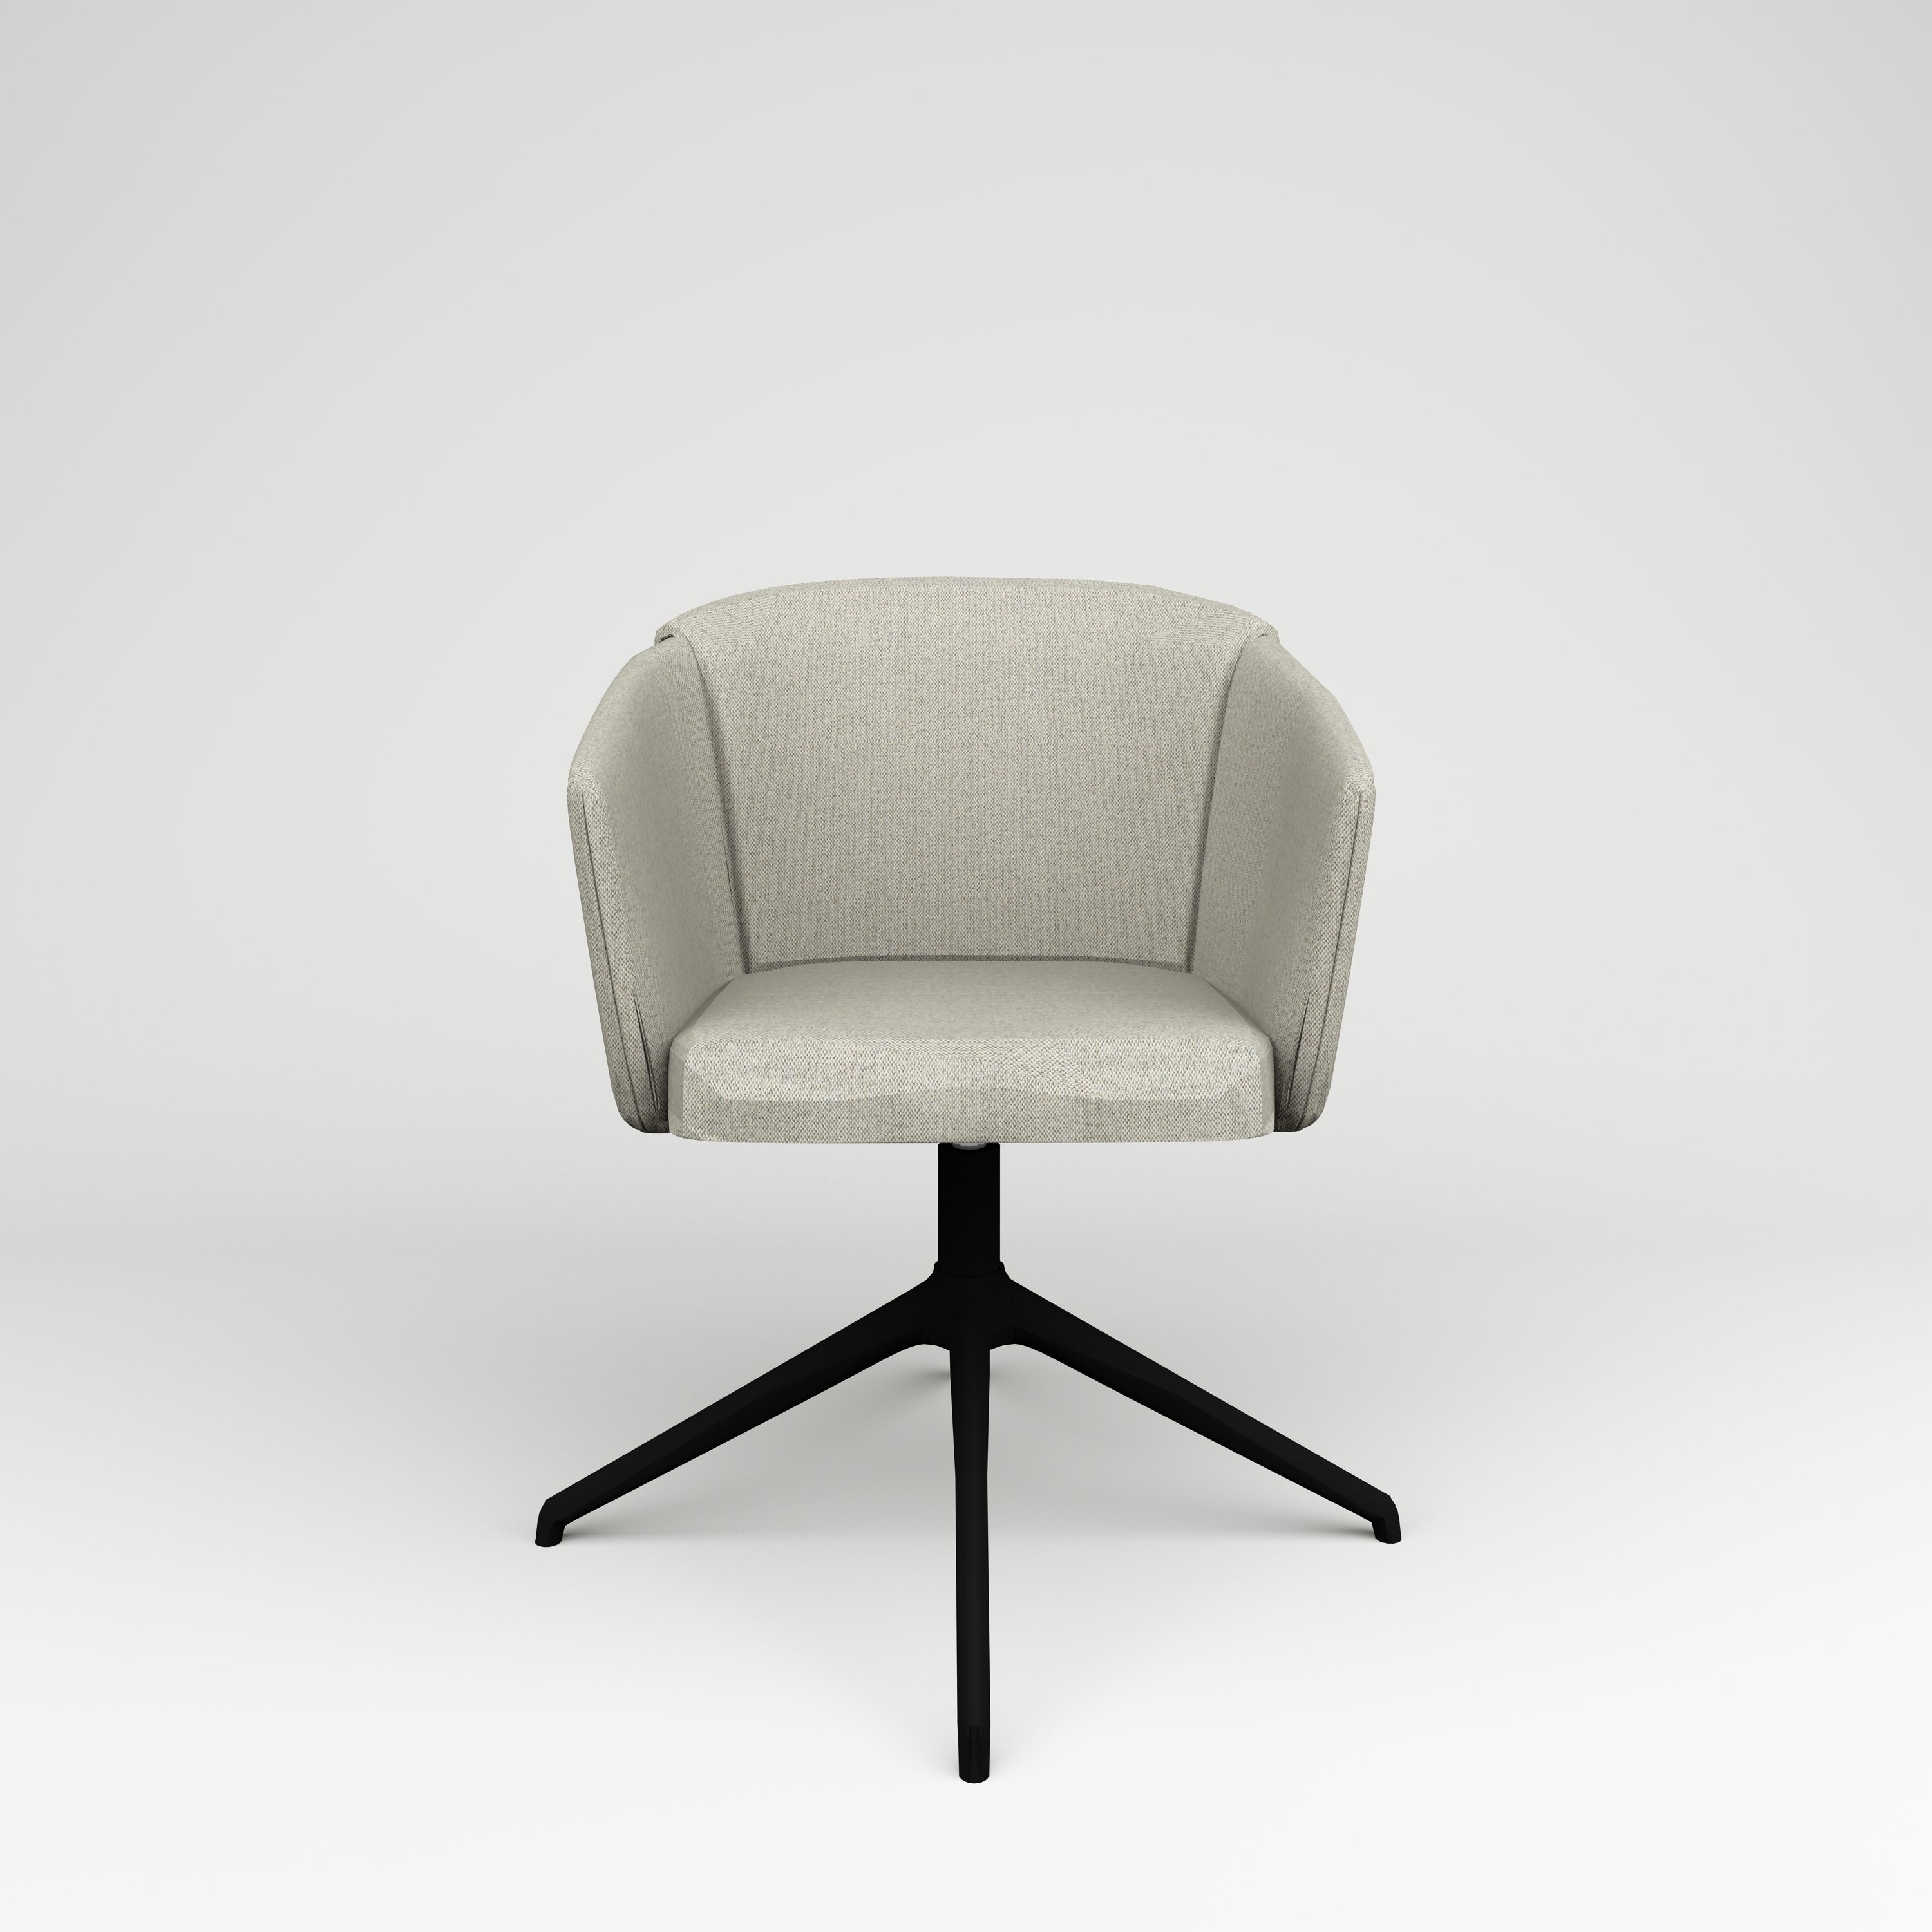 Conference chair Norma on black cross stand, gray-beige